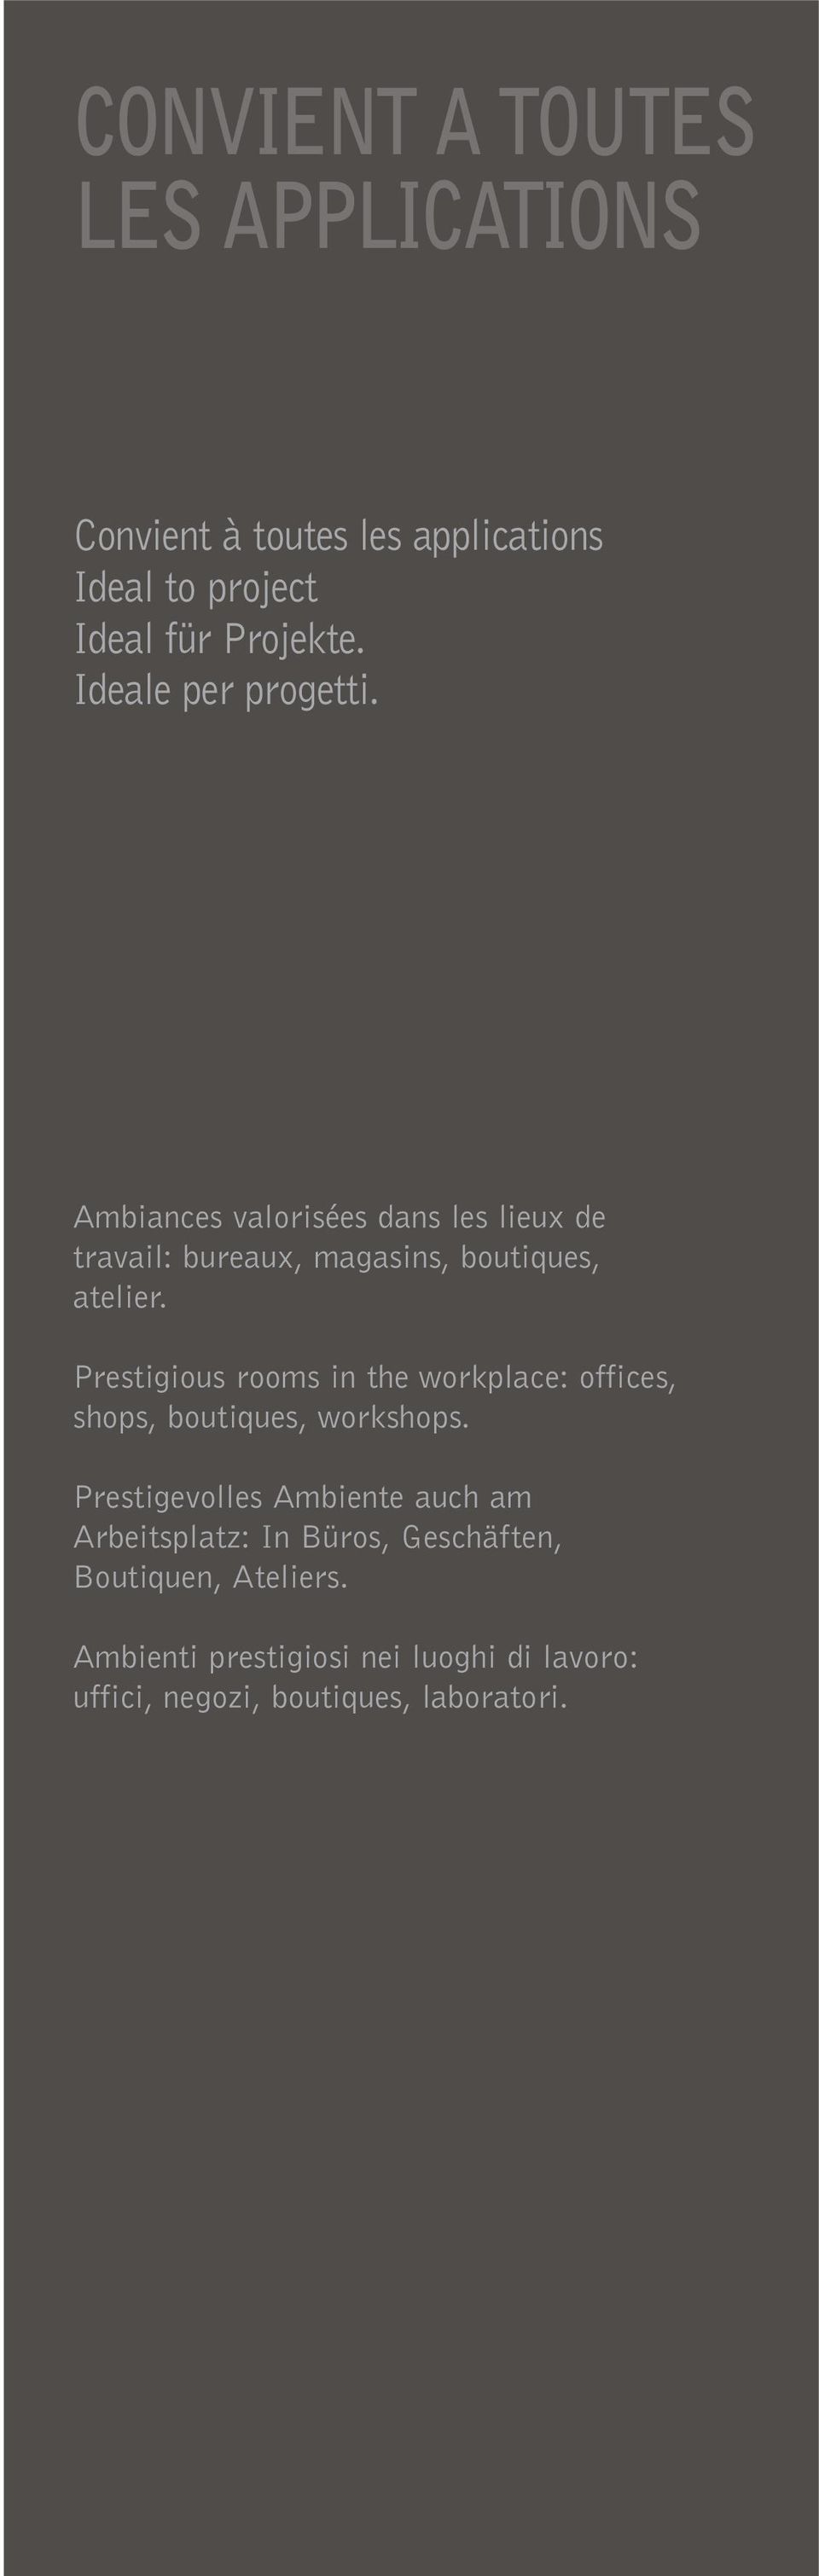 Prestigious rooms in the workplace: offices, shops, boutiques, workshops.